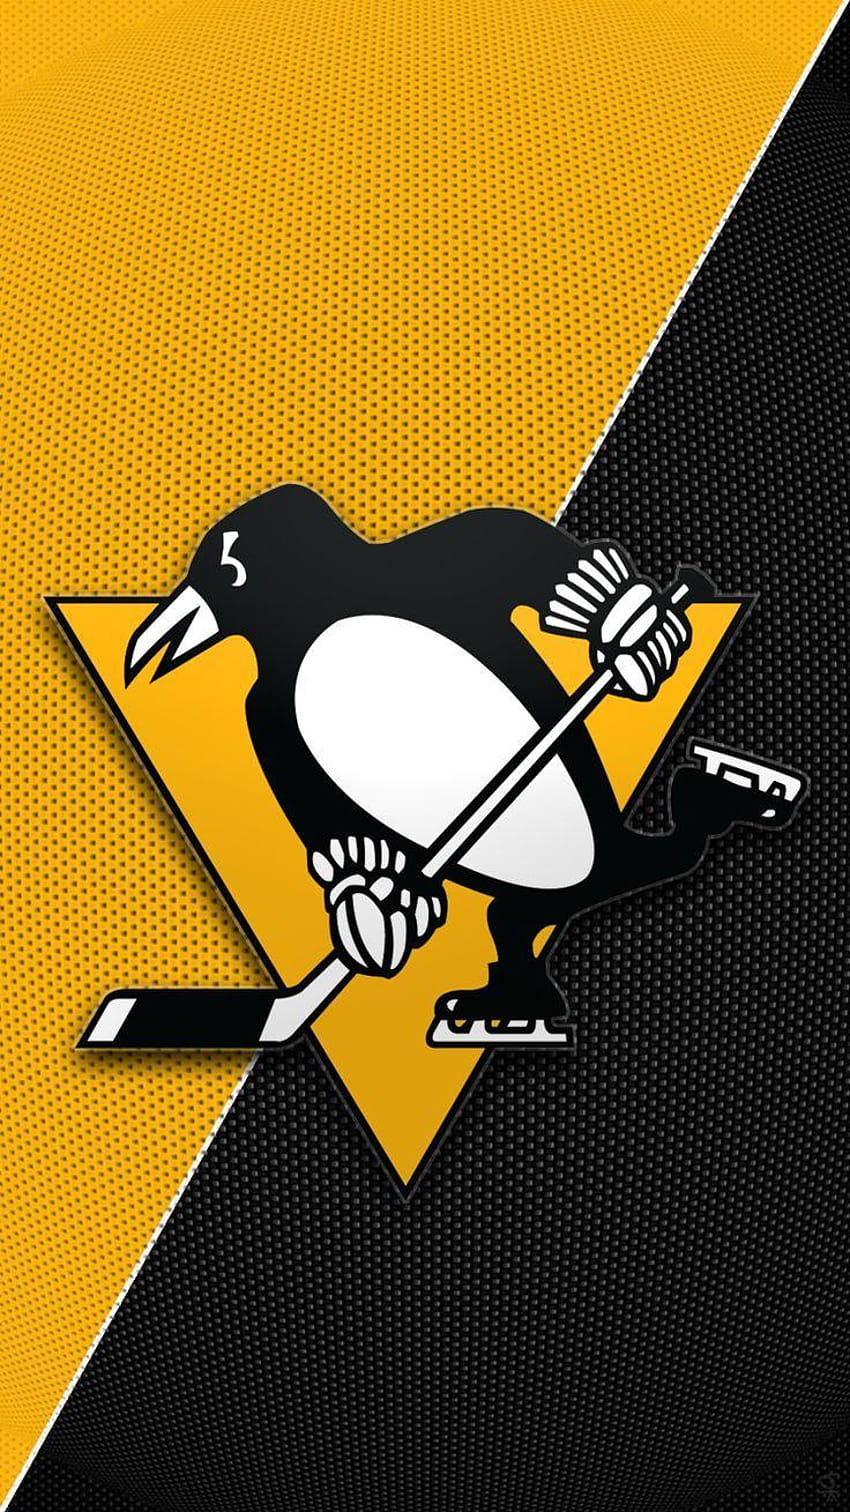 Pittsburgh Penguins on Twitter Happy Wallpaper Wednesday Pens fans  Make sure your phone is ready with the March schedule or another awesome Penguins  wallpaper httpstcoBiqqFaqWIR httpstcoWouprk8idI  Twitter